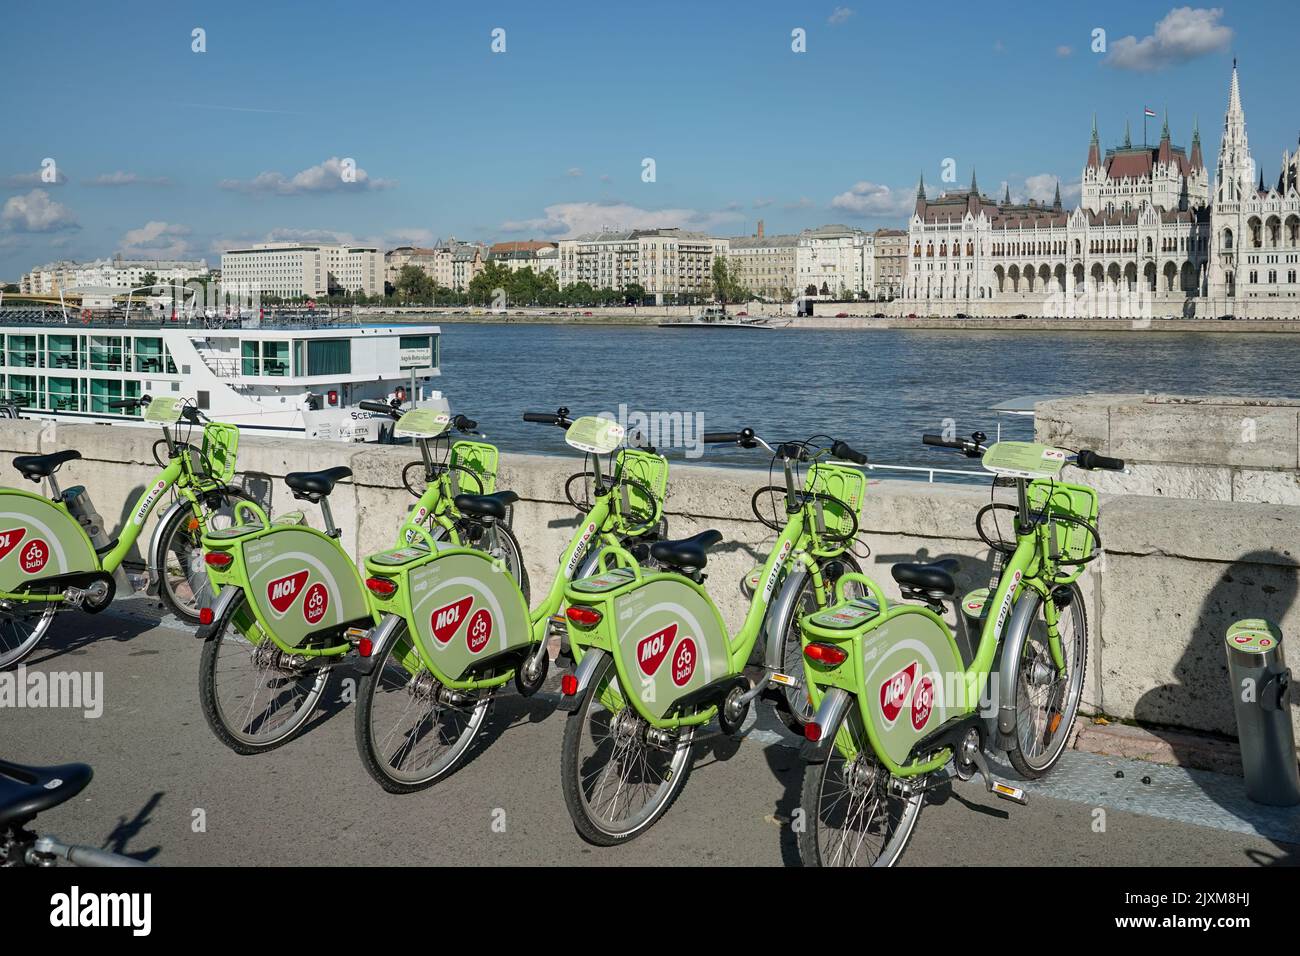 Budapest, Hungary - September 21 : Green Bicycles Available for Hire in Budapest on September 21, 2014 Stock Photo